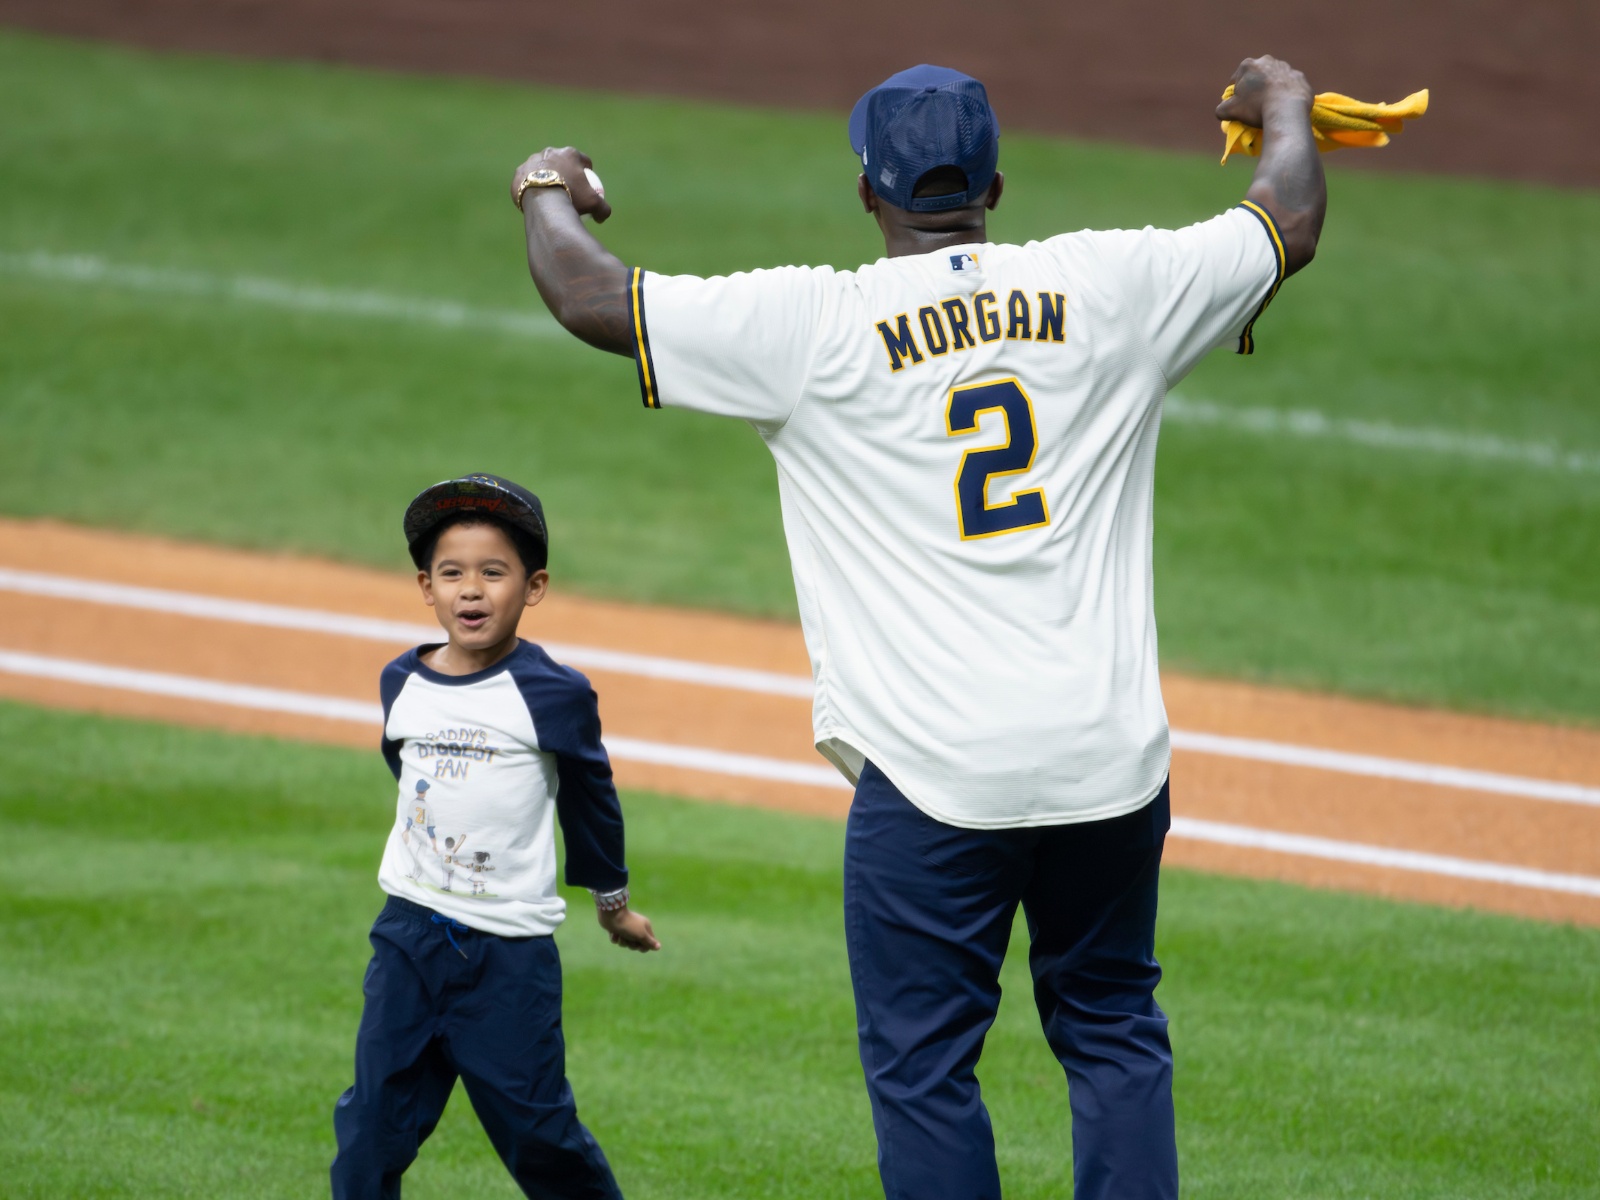 Nyjer Morgan to throw out first pitch in Game 2 of Wild Card series